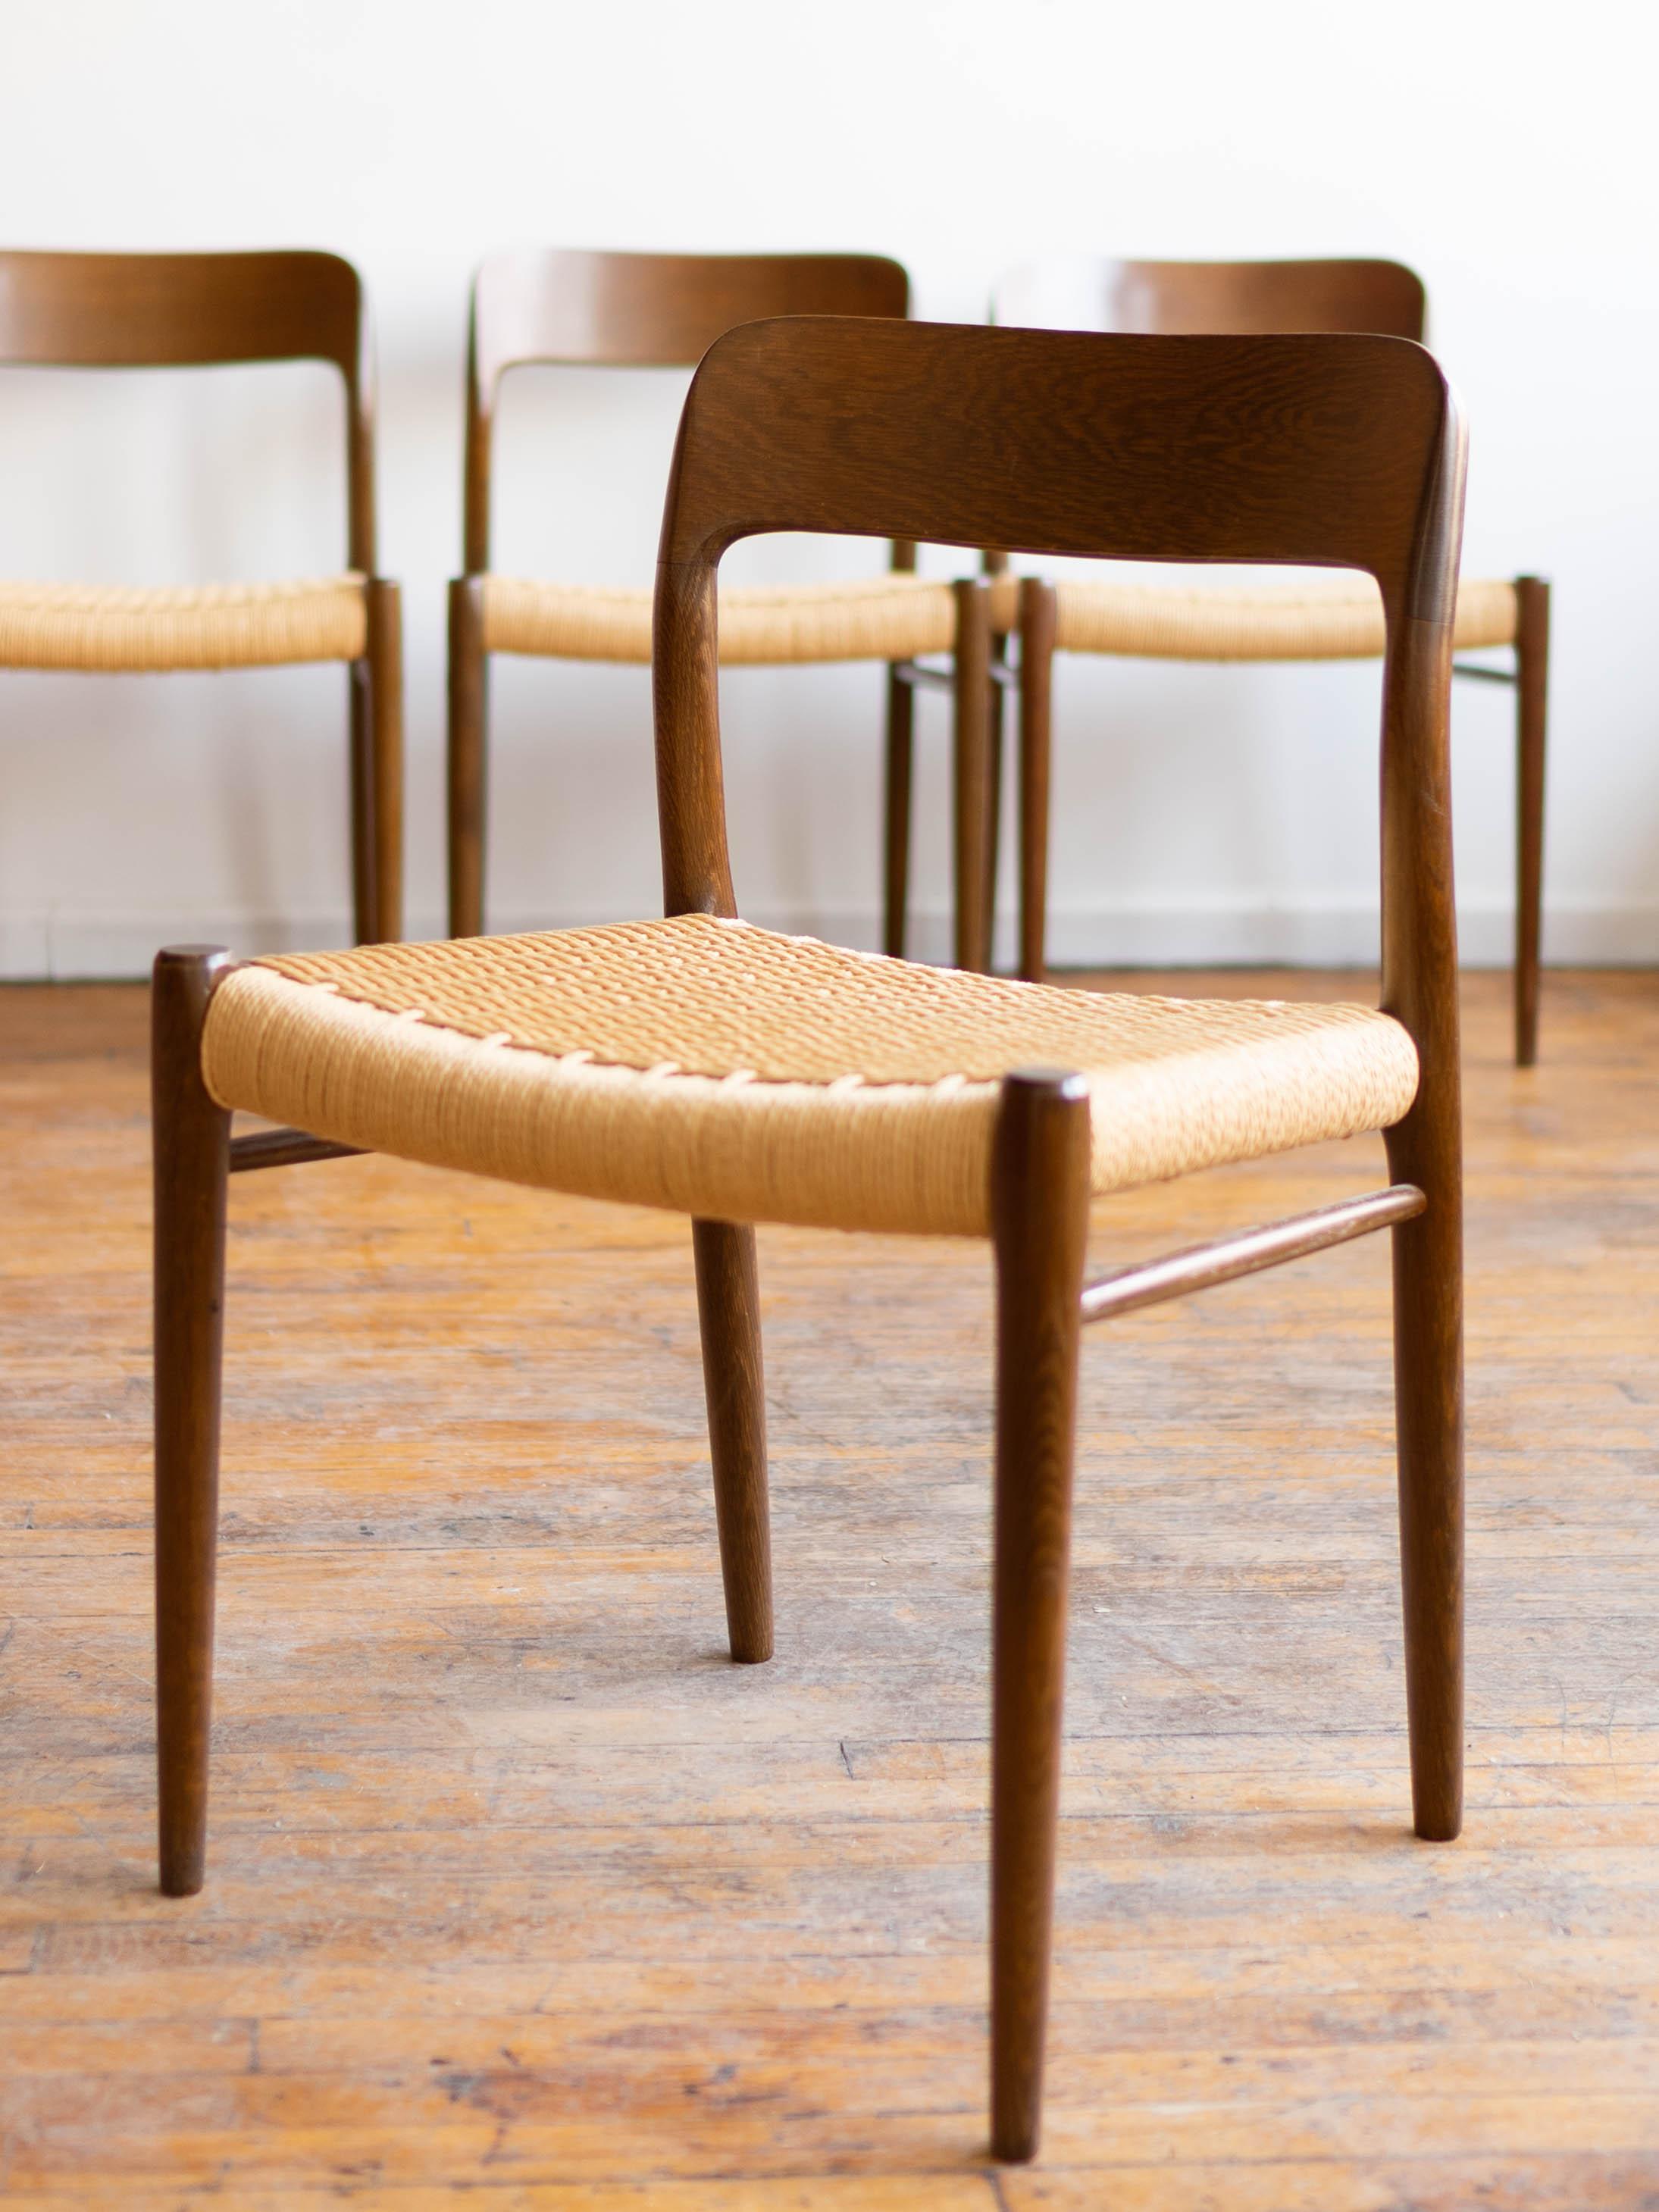 Mid-20th Century 1960s Mid-Century Modern Danish Moller 75 Chairs in Wenge Wood - Set of 4